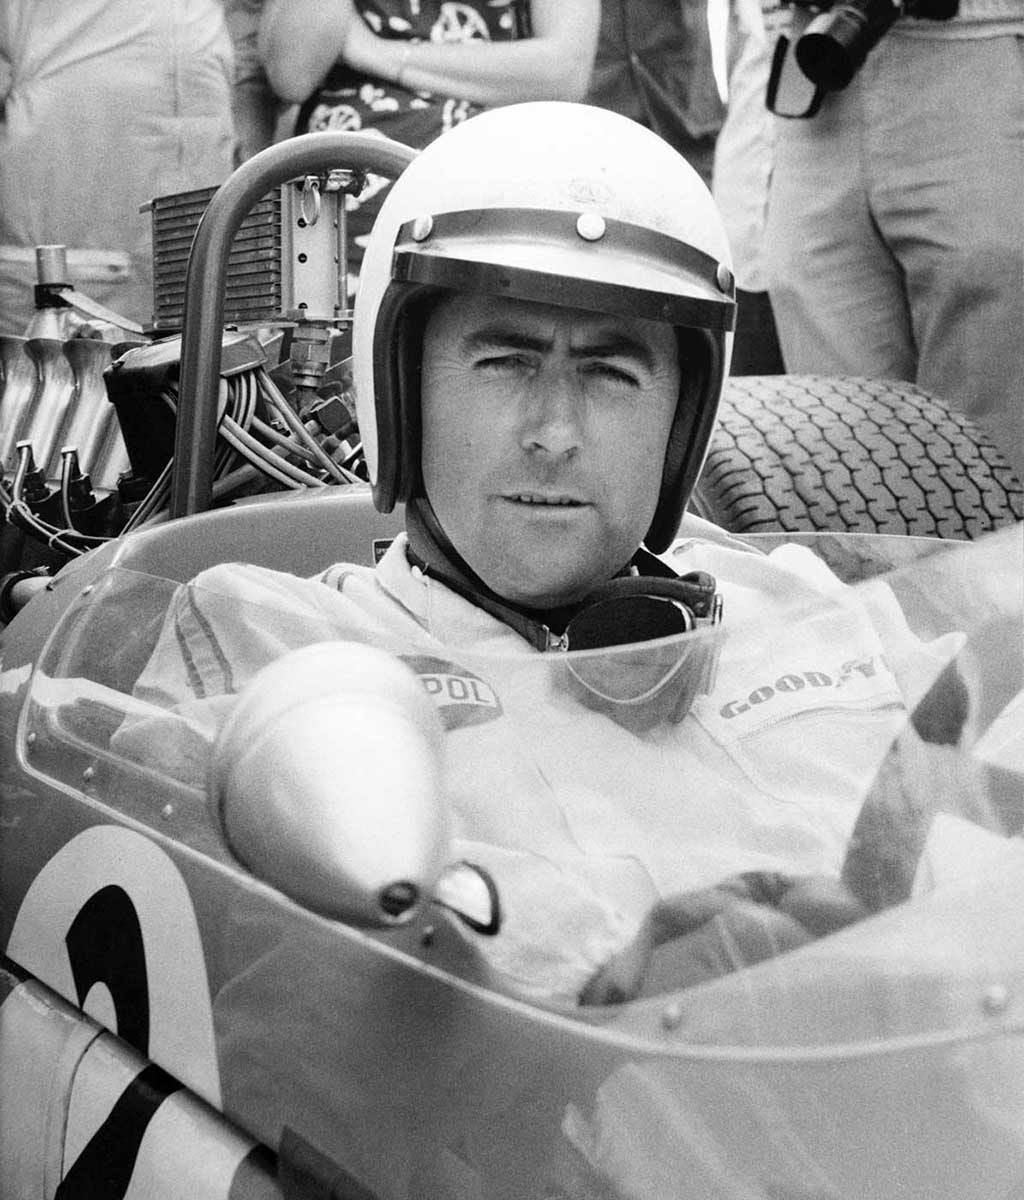 Black and white photograph of a man wearing a helmet in race car. - click to view larger image